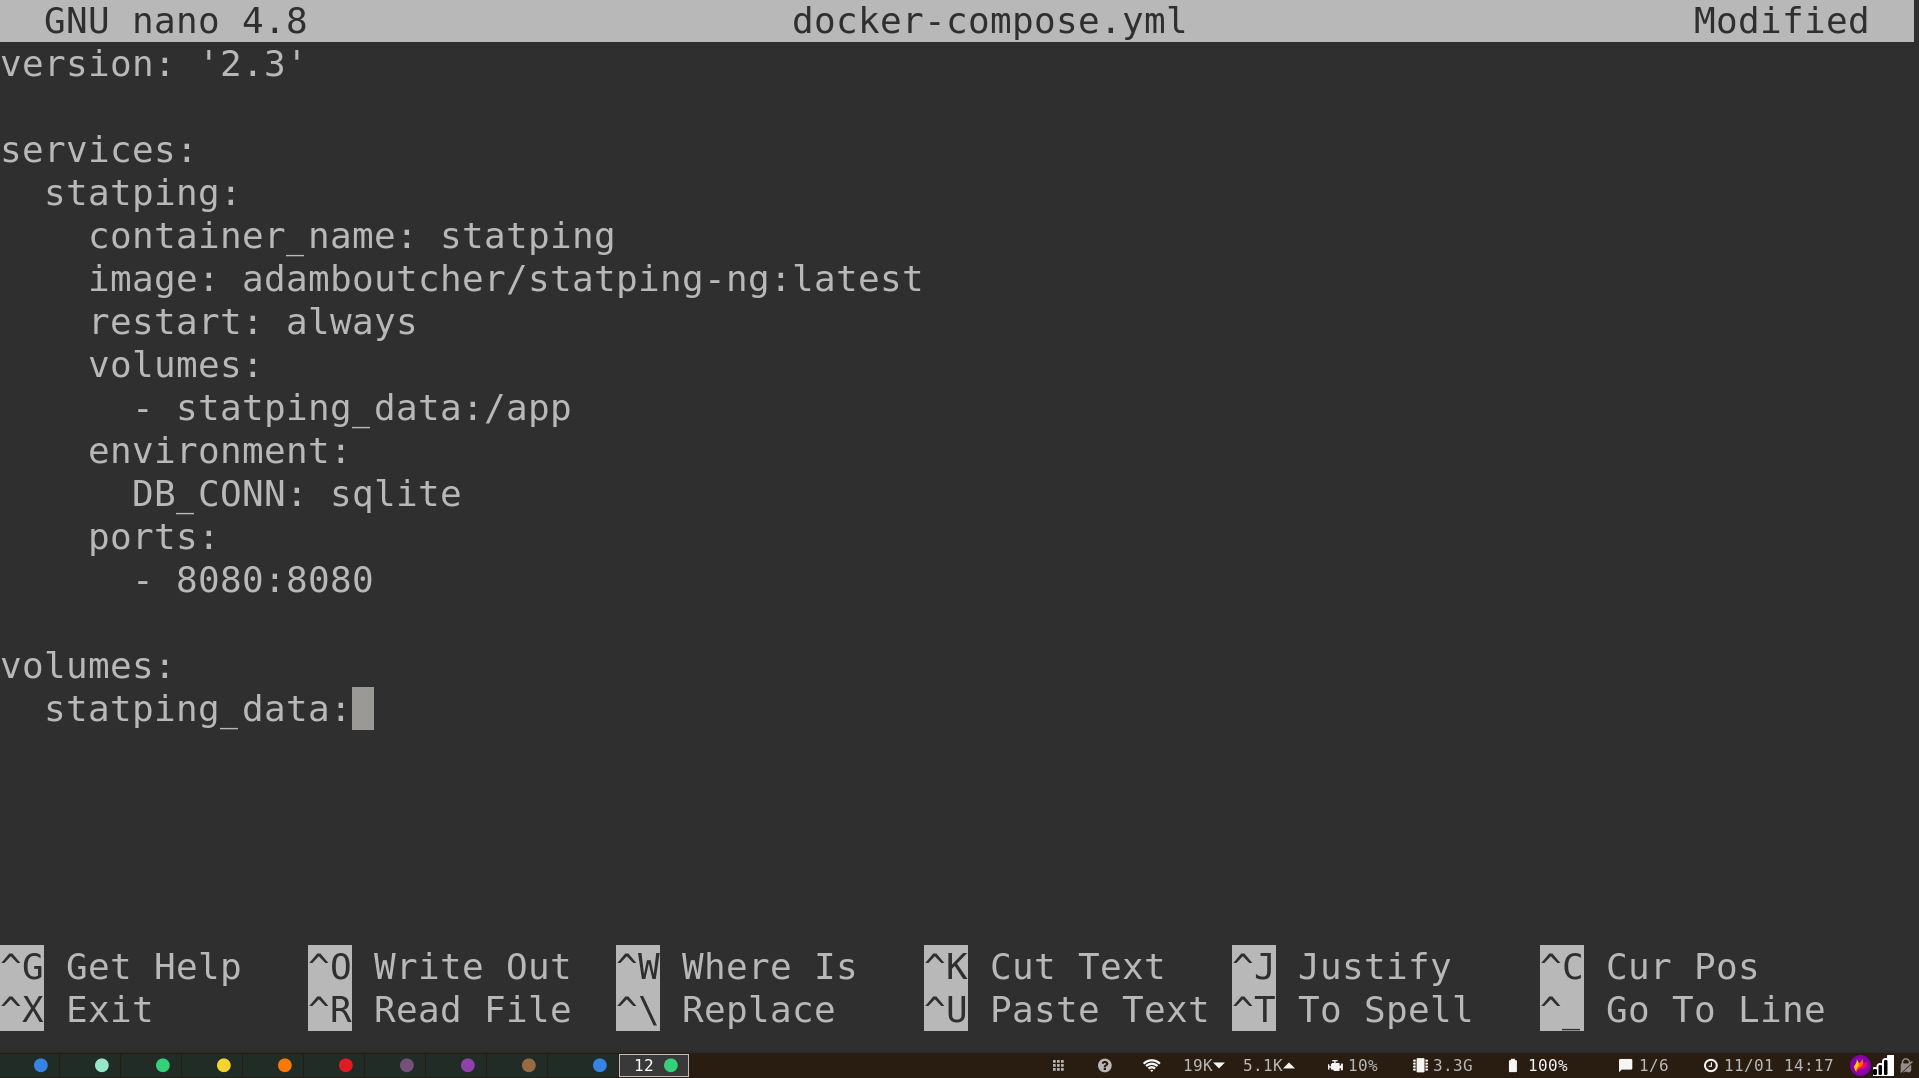 Docker compose file for statping-ng open in nano text editor